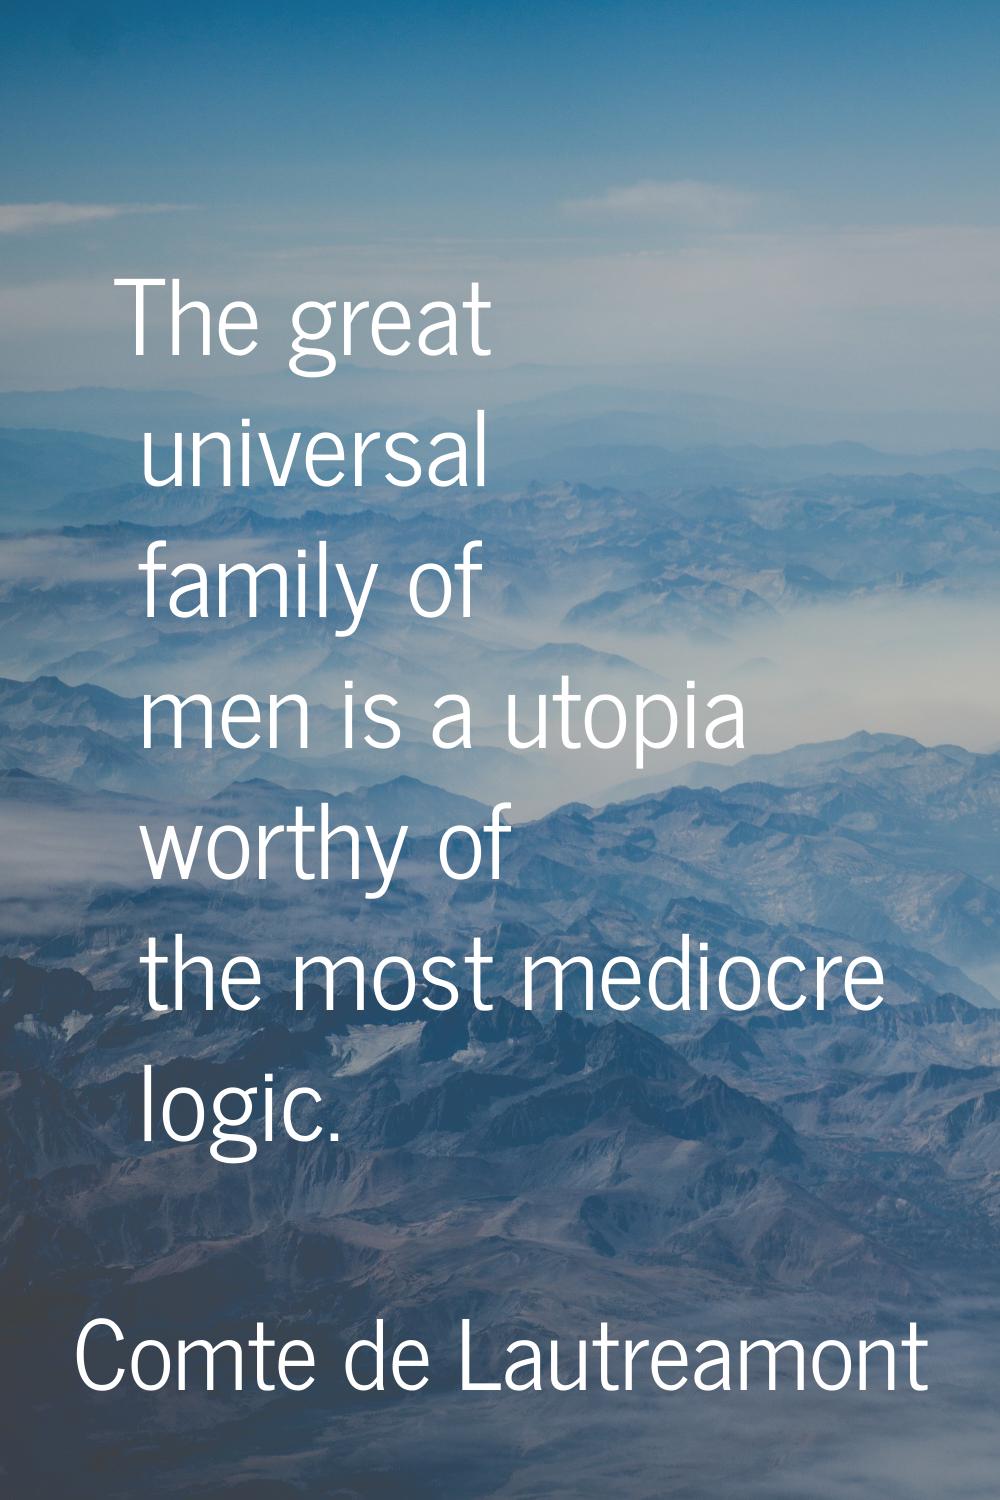 The great universal family of men is a utopia worthy of the most mediocre logic.